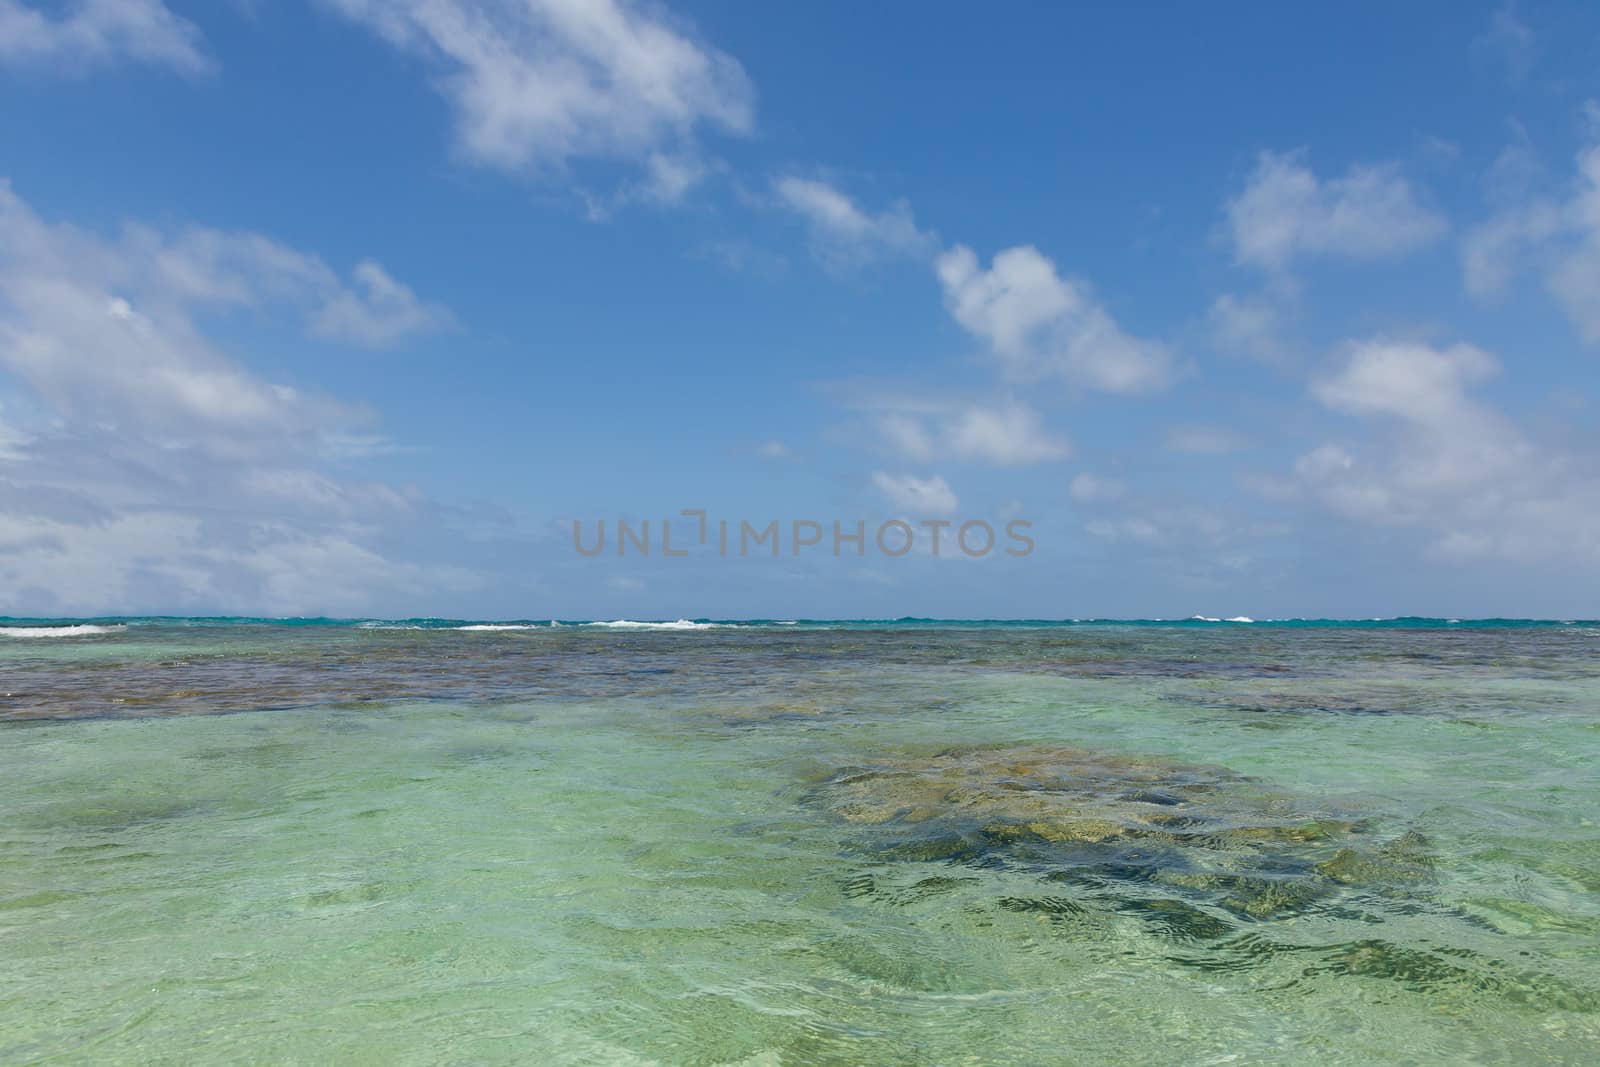 Beautiful Calm Caribbean Sean from Swimmer's Perspective by scheriton